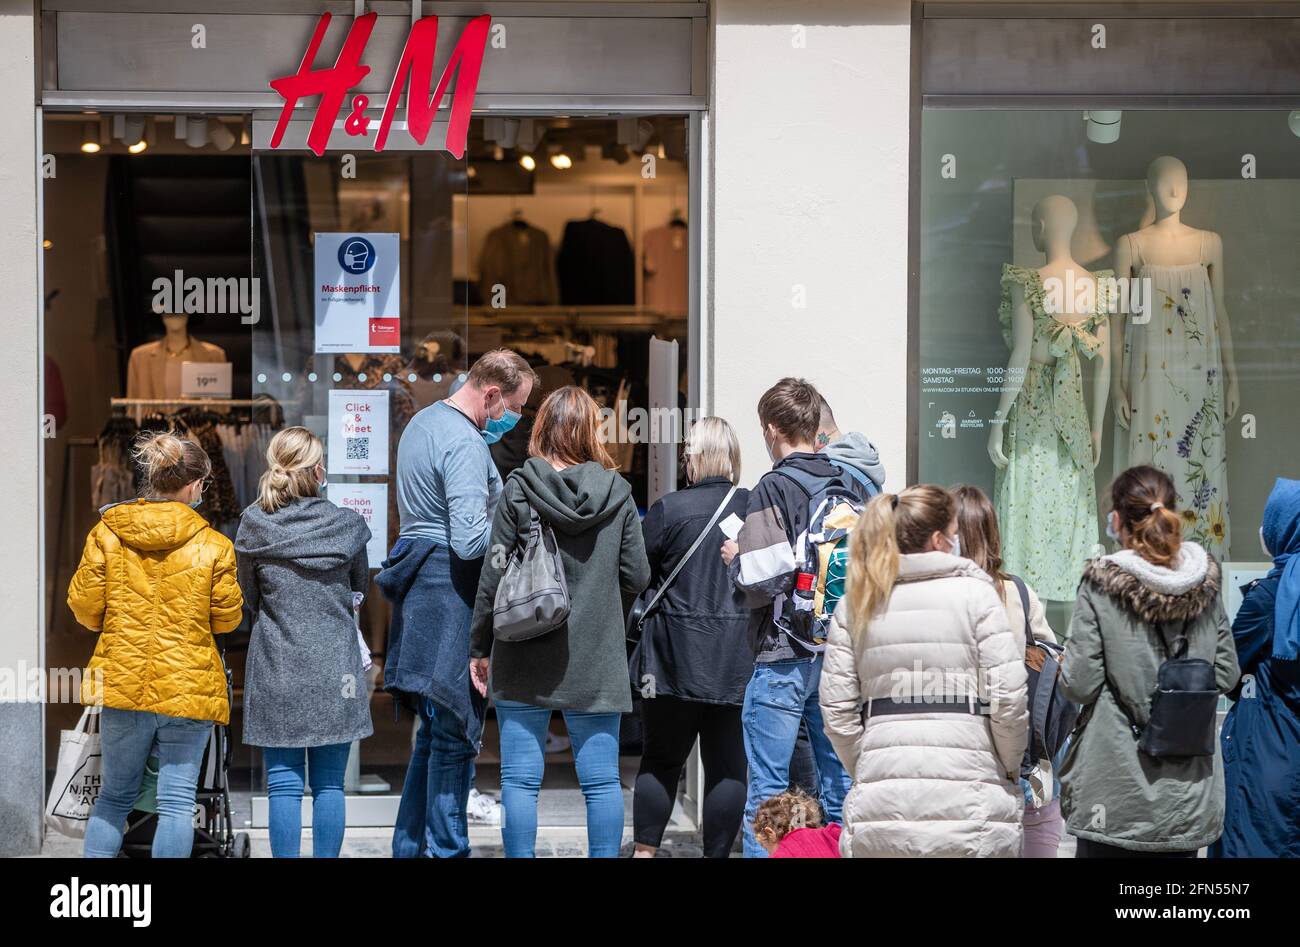 Tubingen, Germany. 14 May 2021: Customers line up outside a clothing store.  Stores that were closed for three weeks due to the "federal emergency  brake" are allowed to reopen for customers with